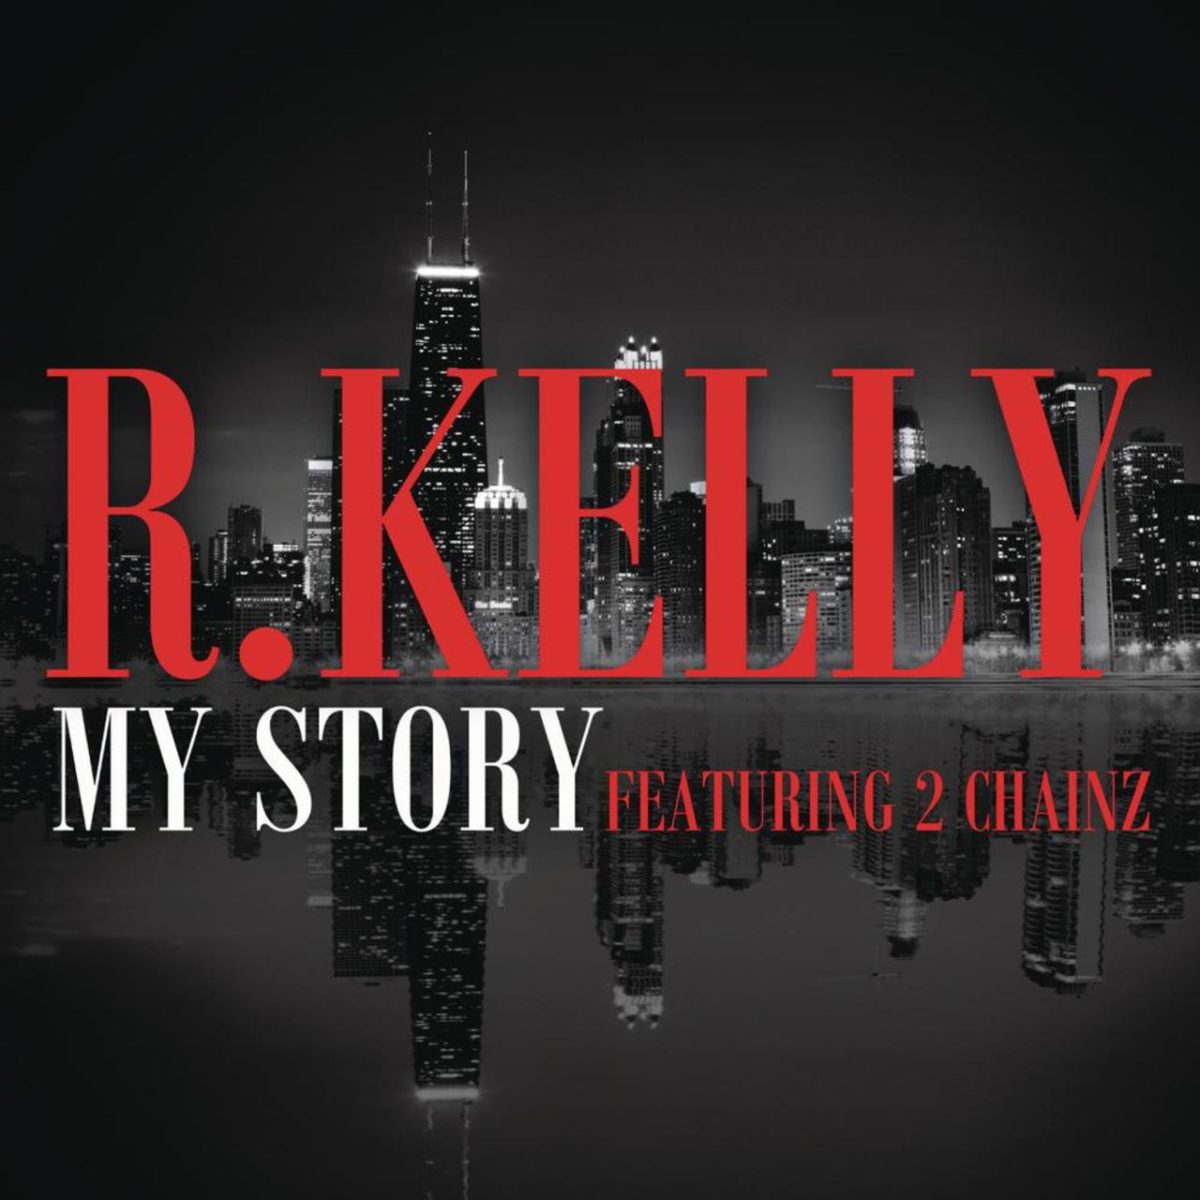 R. Kelly - My Story (ft. 2 Chainz) (Cover)